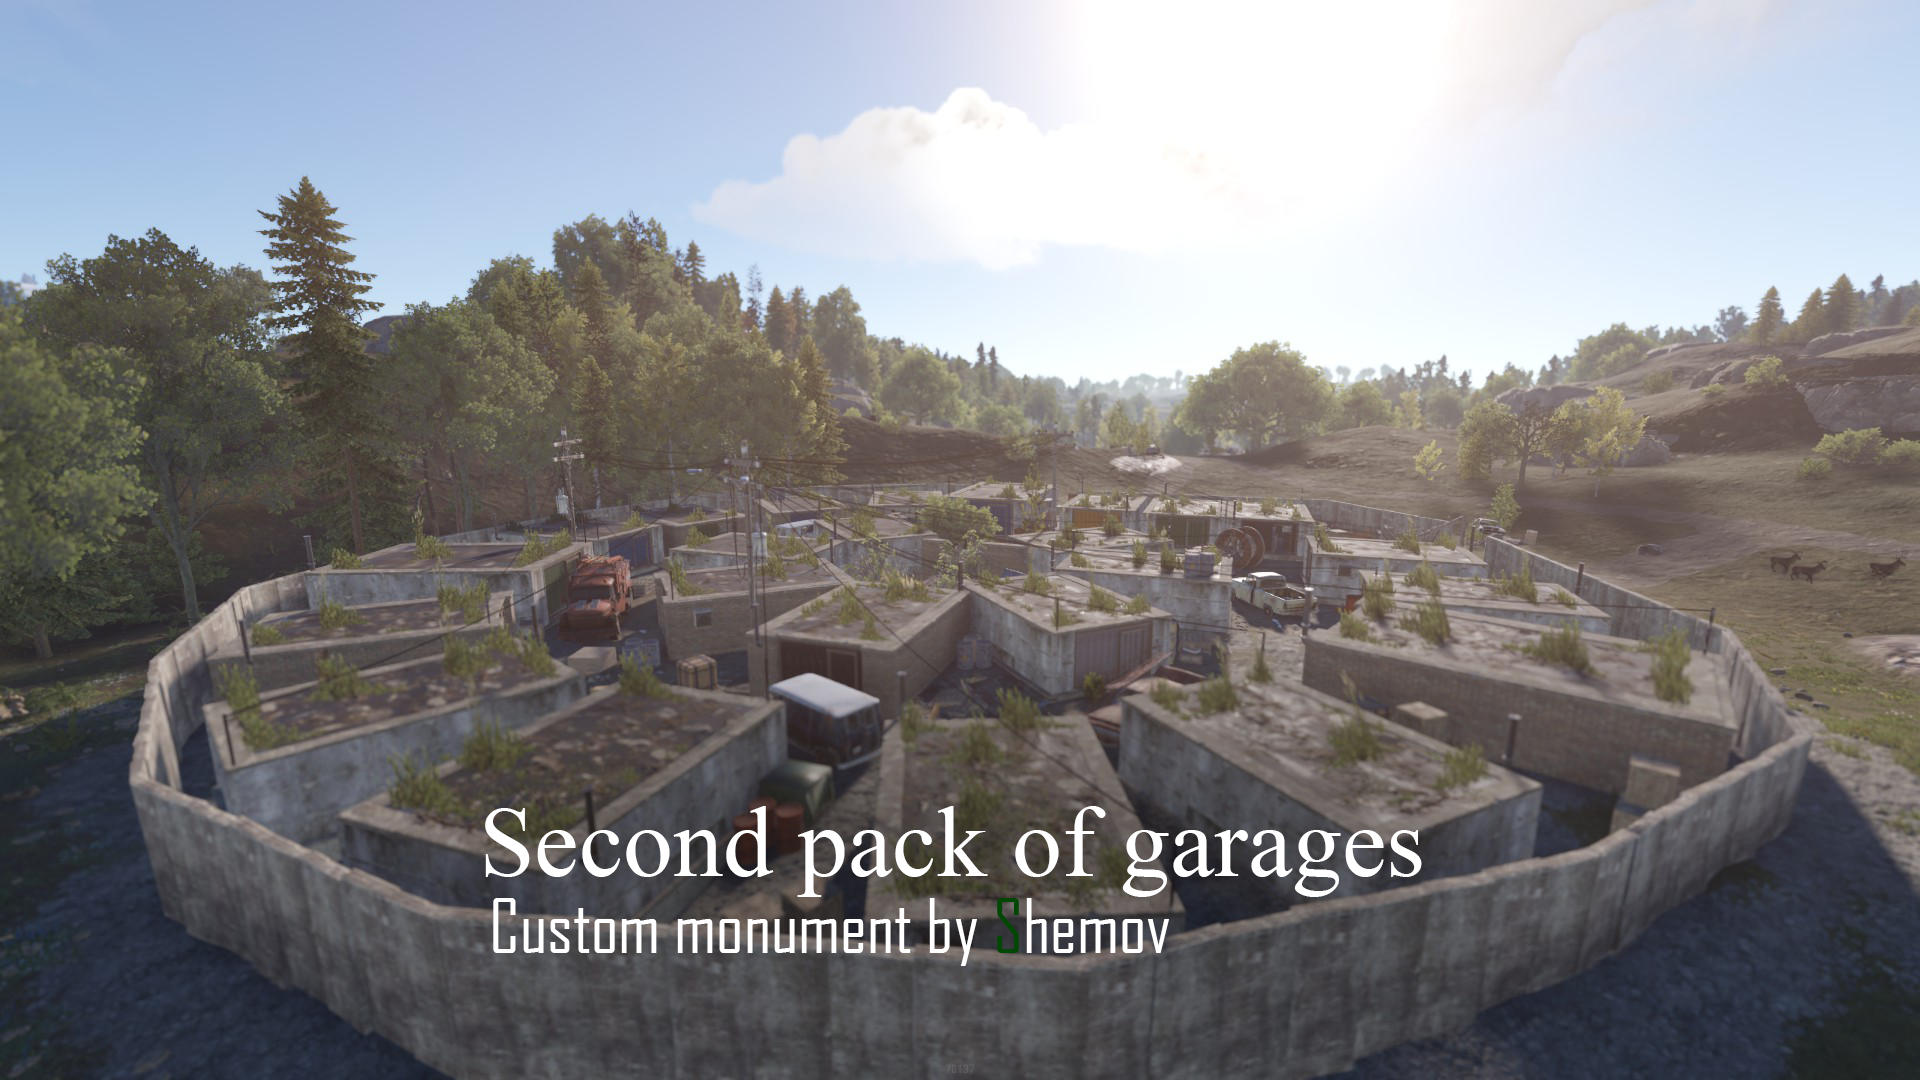 Garages B | Pack of garages monuments by Shemov